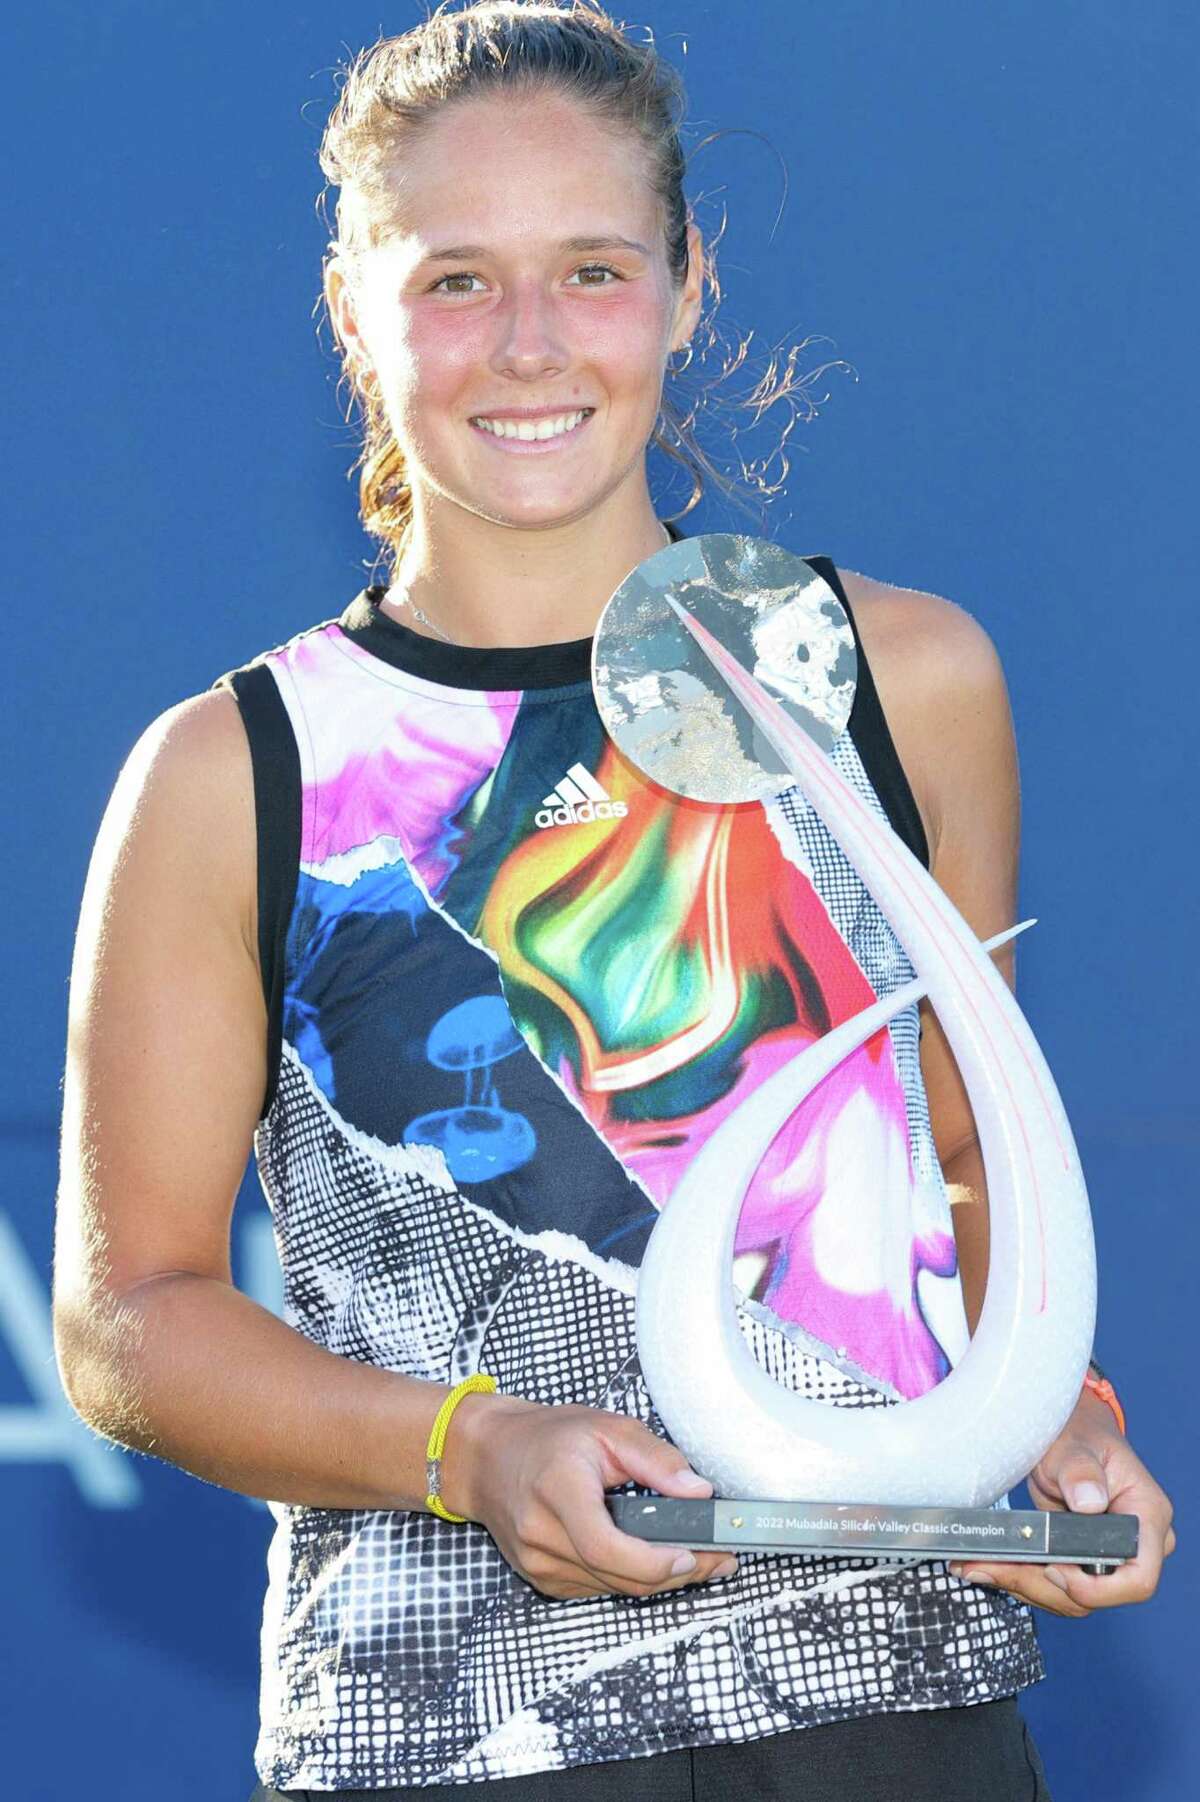 SAN JOSE, CALIFORNIA - AUGUST 07: Daria Kasatkina of Russia holds the trophy after defeating Shelby Rogers in the singles finale at Mubadala Silicon Valley Classic, part of the Hologic WTA Tour, at Spartan Tennis Complex on August 07, 2022 in San Jose, California. (Photo by Carmen Mandato/Getty Images)